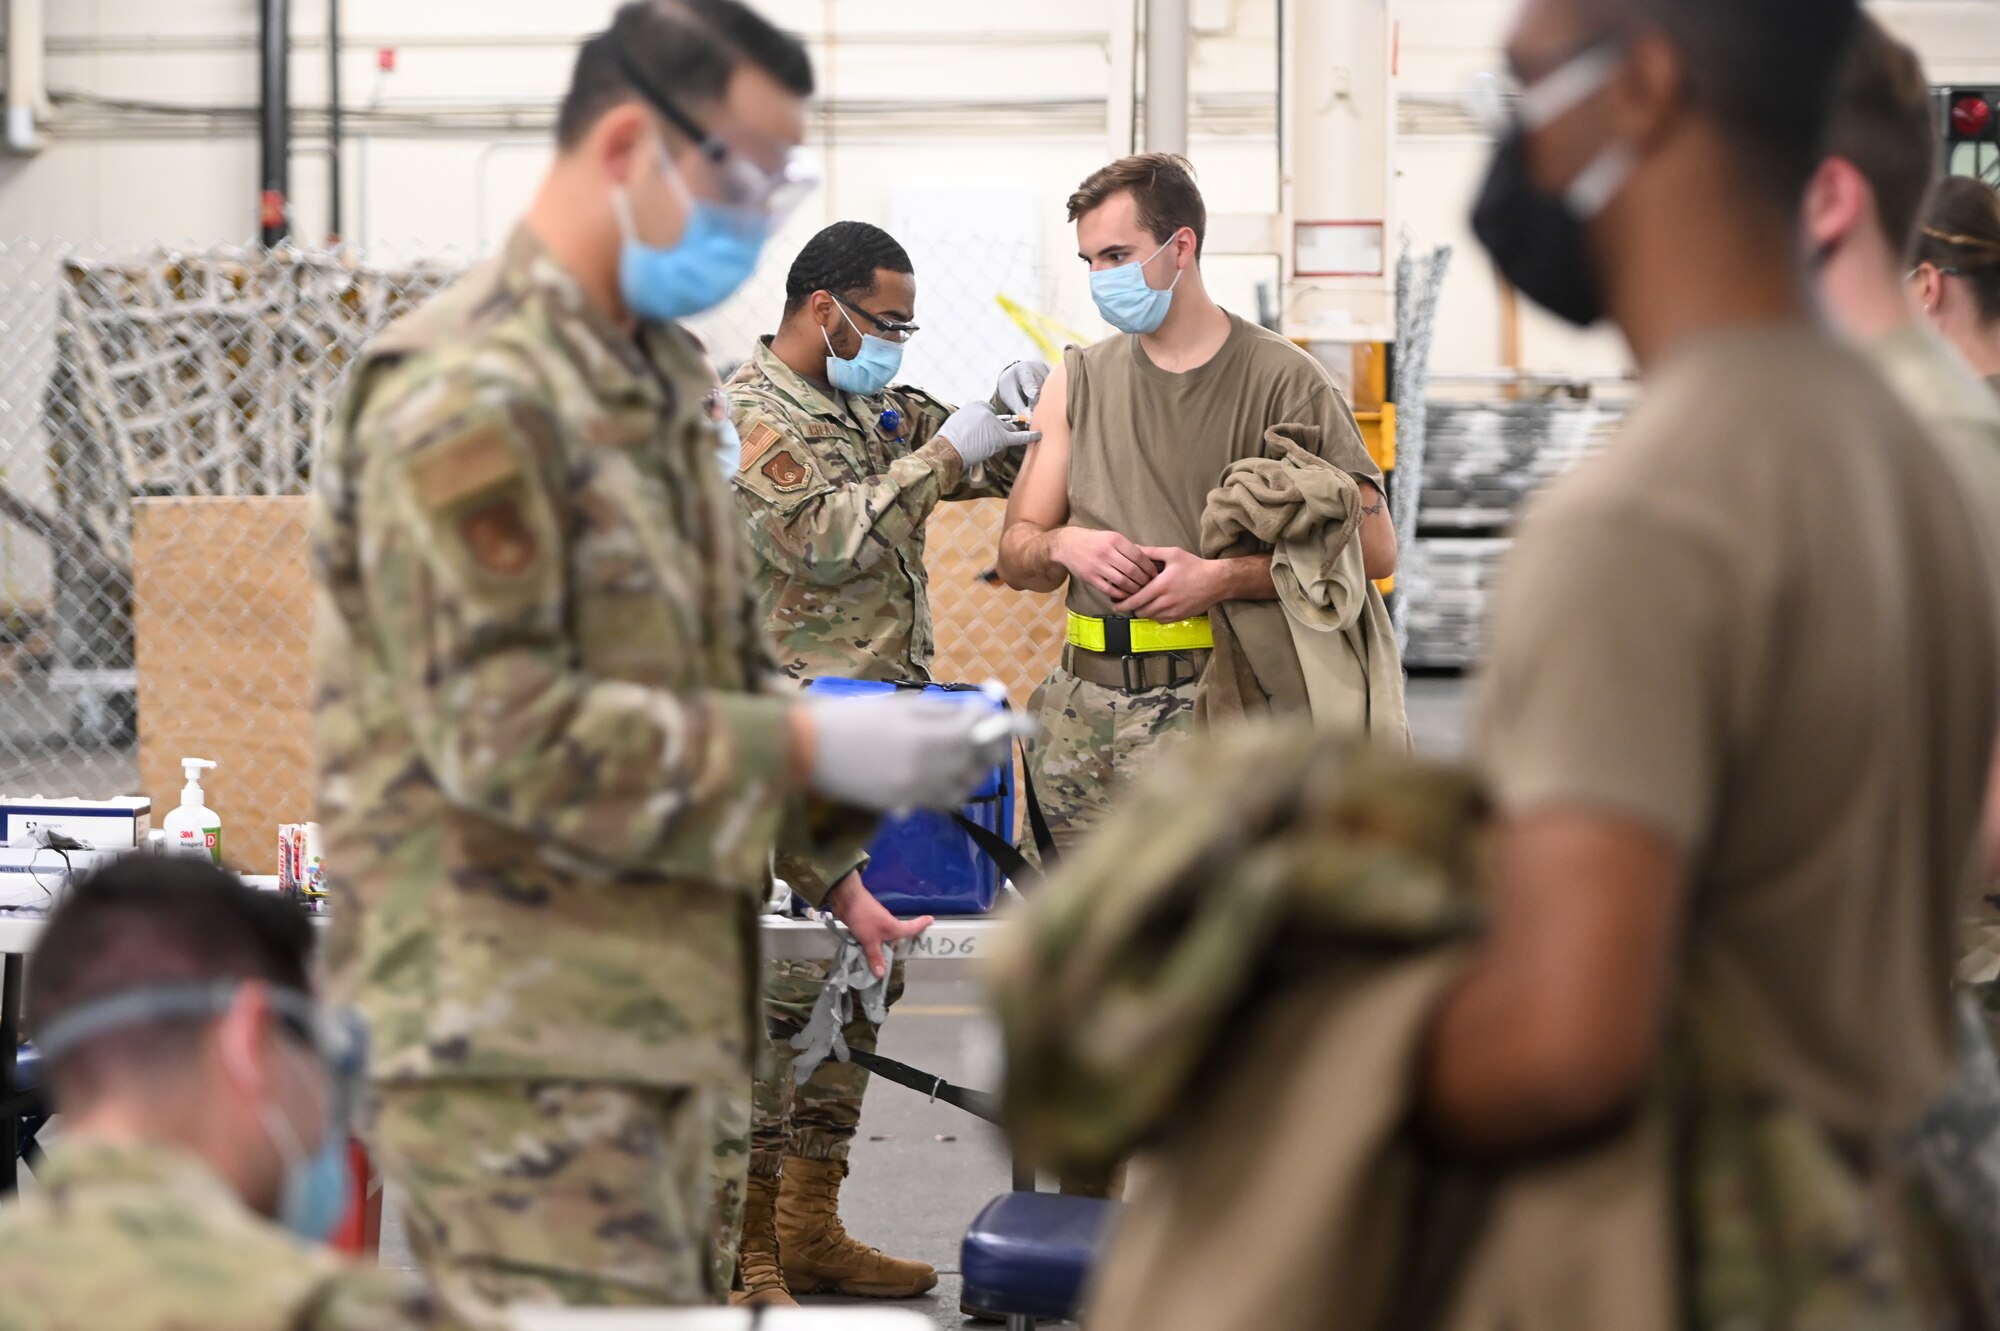 Airmen from Hill Air Force Base, Utah, receive their flu vaccinations Dec. 17, 2020. The CDC recommends seasonal influenza vaccine for all people 6 months of age and older. The best way to prevent seasonal flu is to get vaccinated every year. (U.S. Air Force photo by Cynthia Griggs)